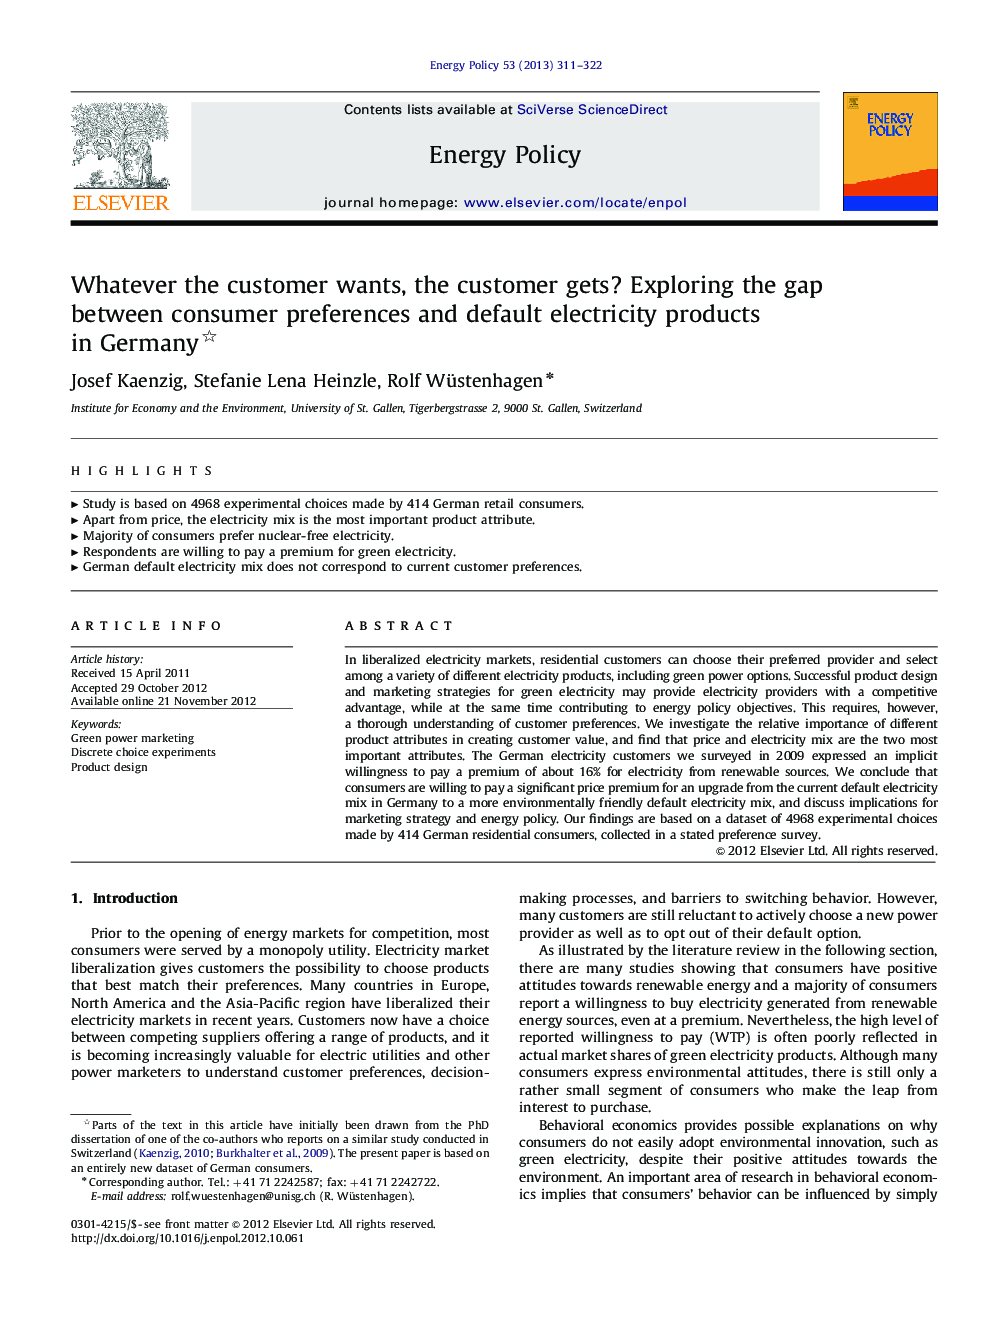 Whatever the customer wants, the customer gets? Exploring the gap between consumer preferences and default electricity products in Germany